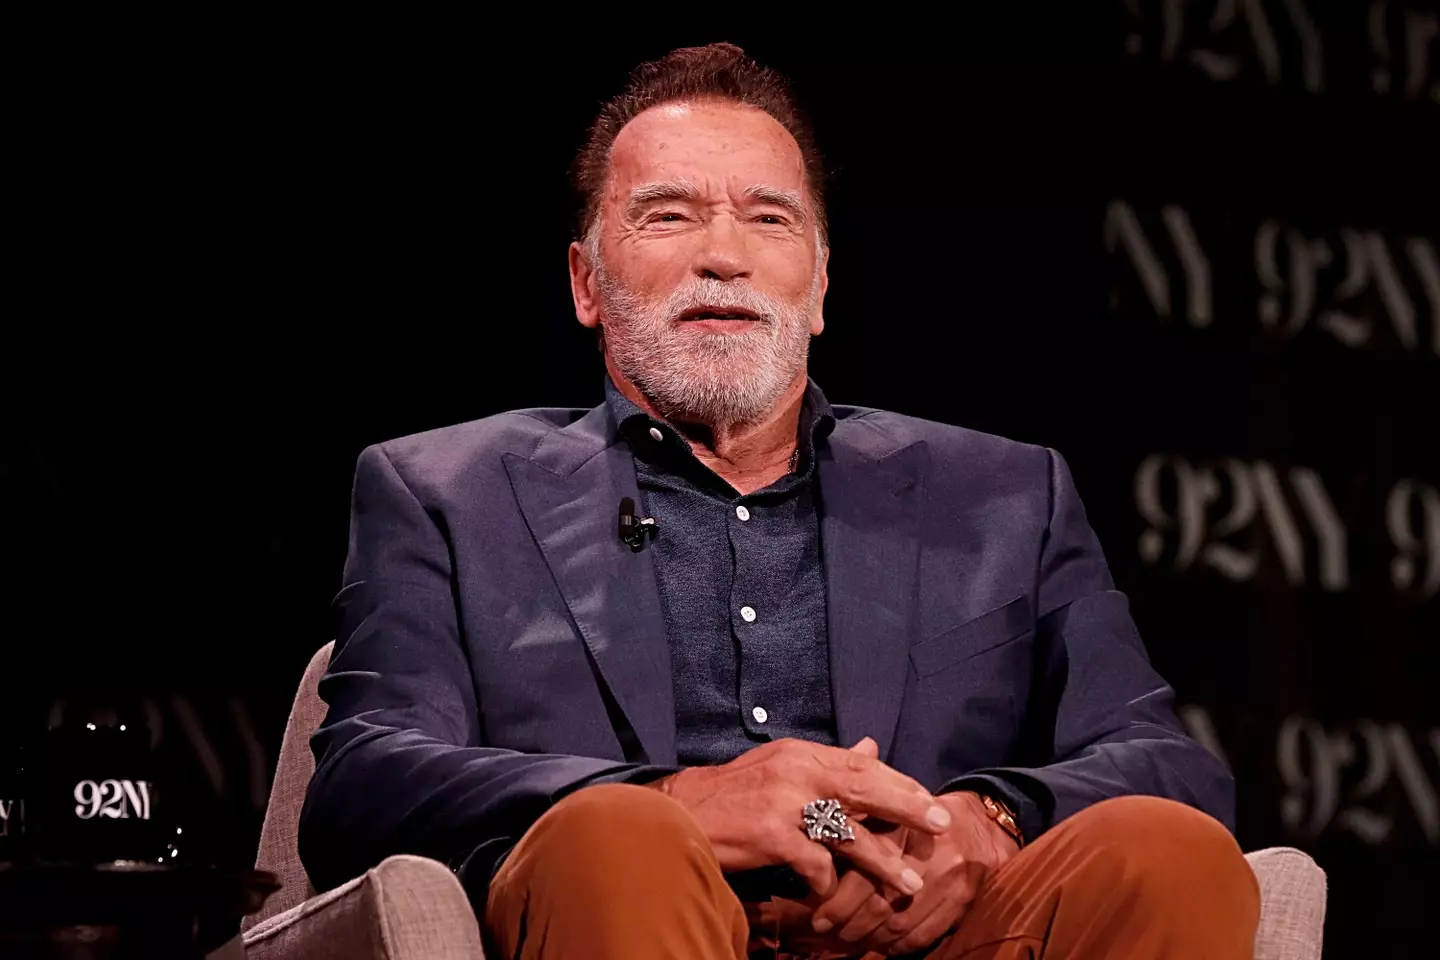 Arnold Schwarzenegger was told he wouldn't make it in Hollywood.